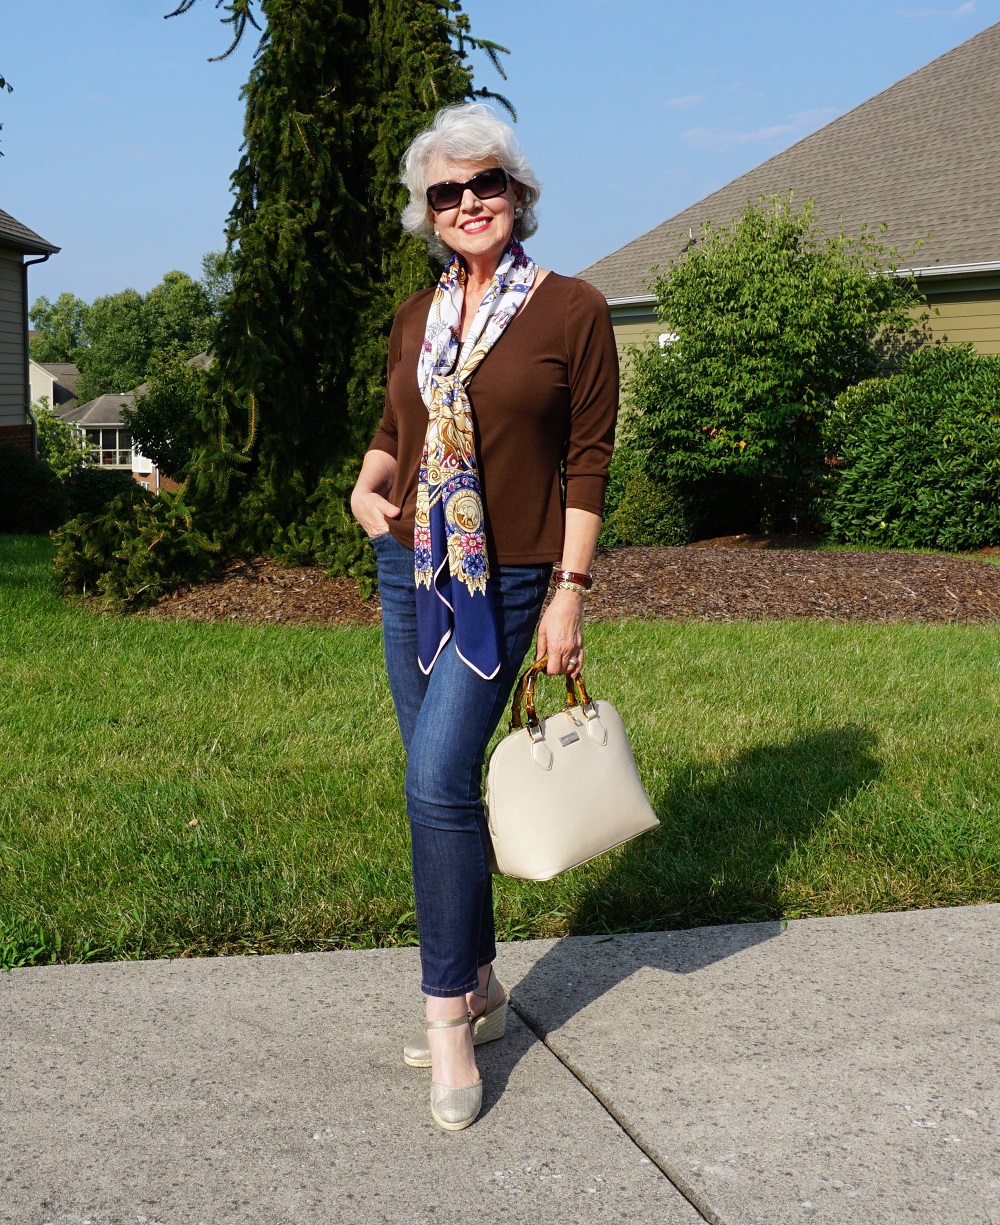 How to Wear a Scarf Over 60 Without Looking Old? 5 Amazing Ways